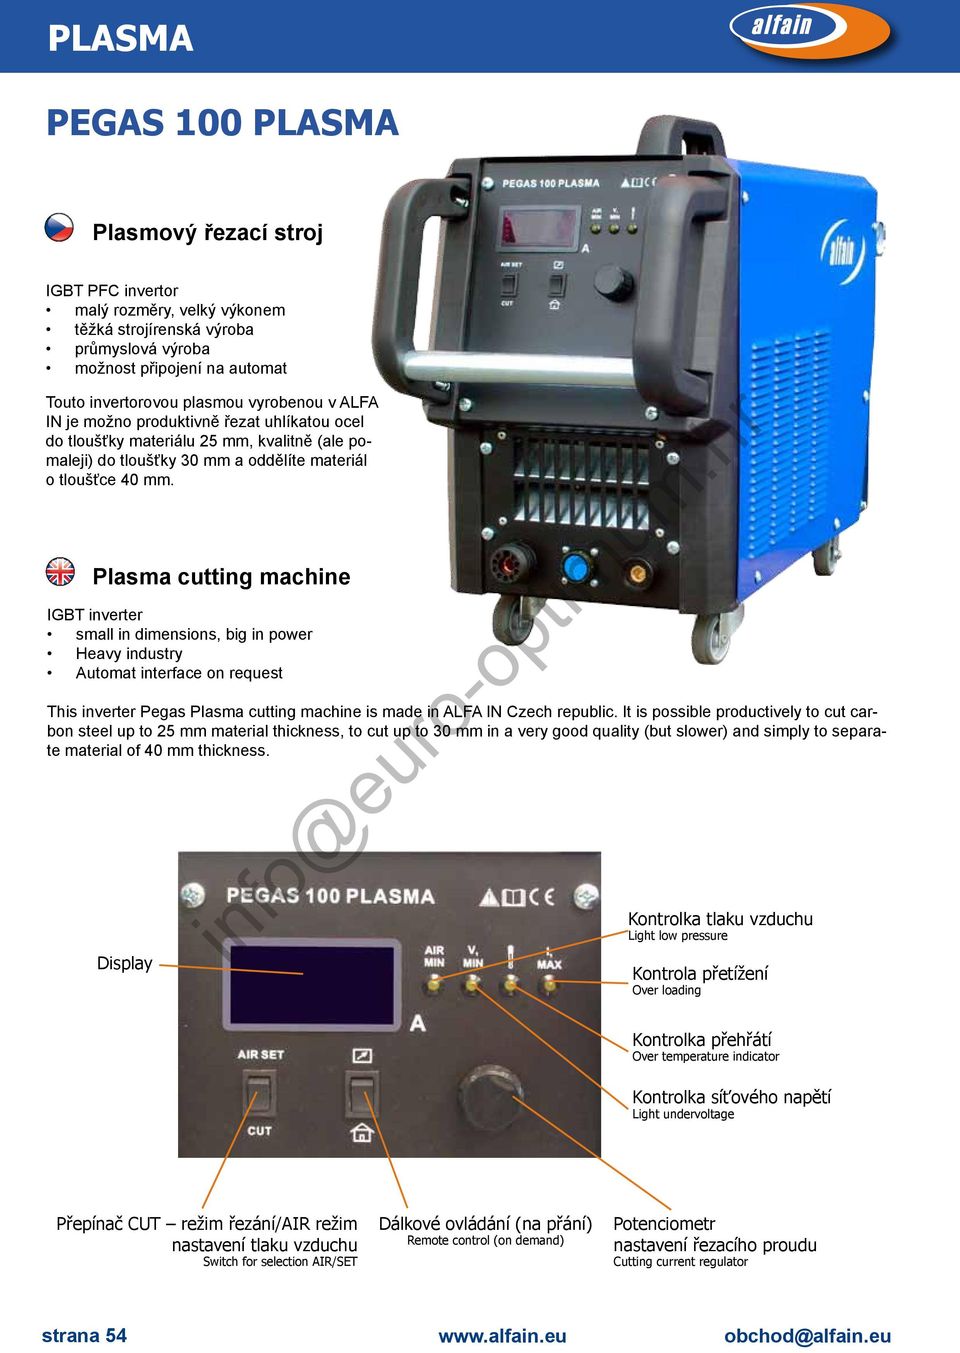 Plasma cutting machine IGBT inverter small in dimensions, big in power Heavy industry Automat interface on request This inverter Pegas Plasma cutting machine is made in ALFA IN Czech republic.